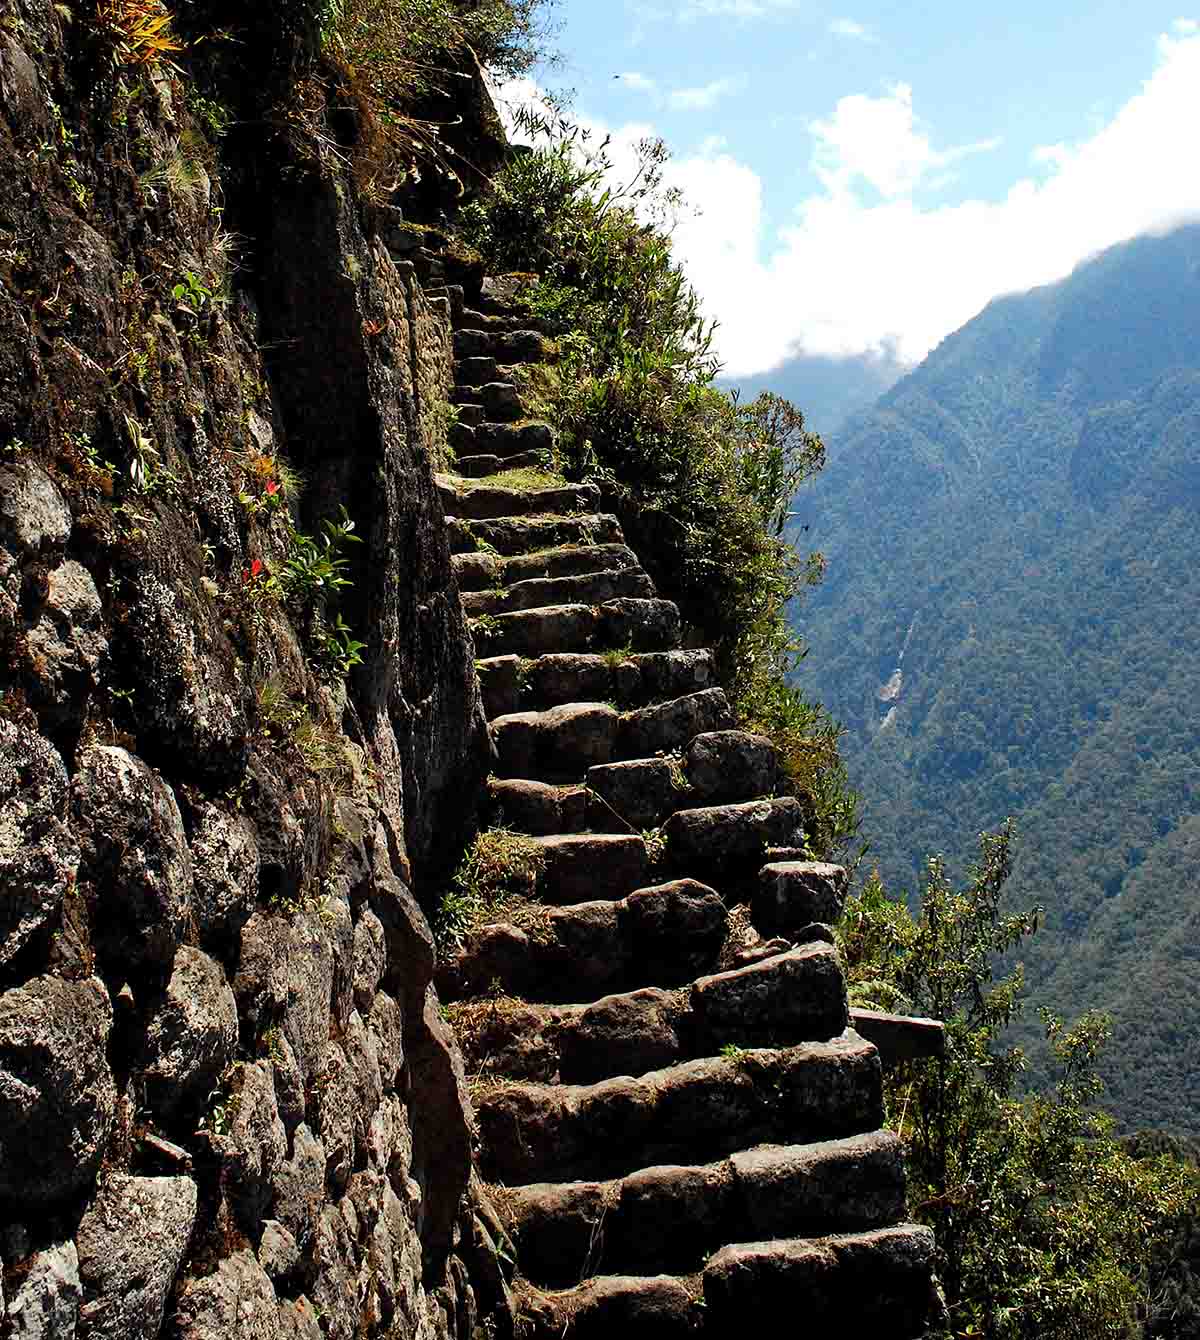 Very steep and uneven steps lead toward the top of Huayna Picchu. To the right is a sharp drop-off into the abyss.